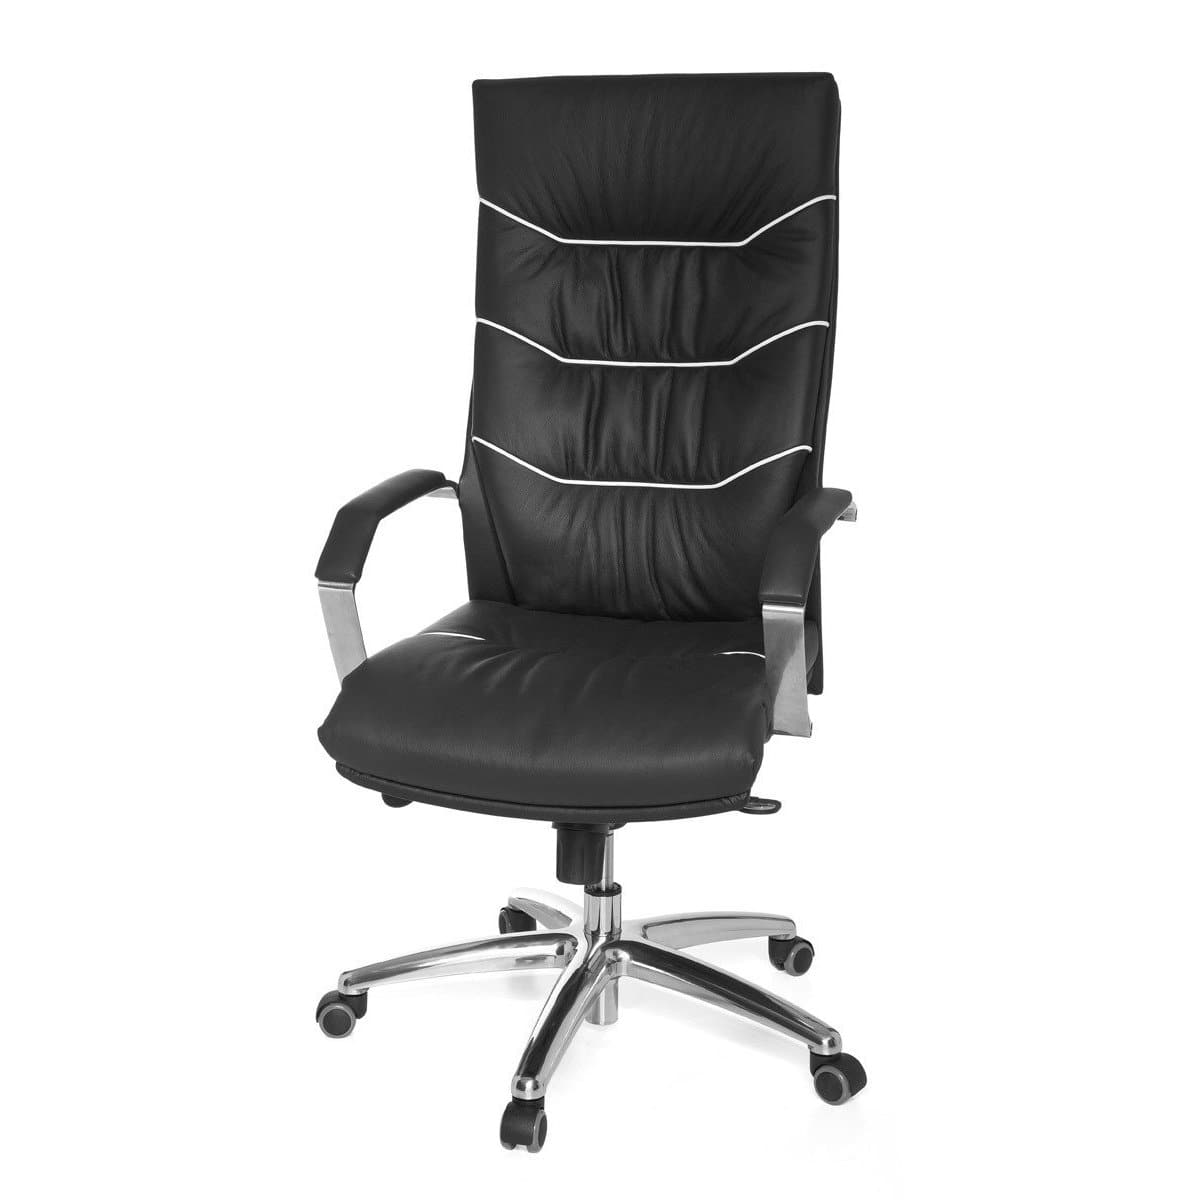 Nancy's Olinville Leather Office Chair - Ergonomic Office Chairs - Office Chair For Adults